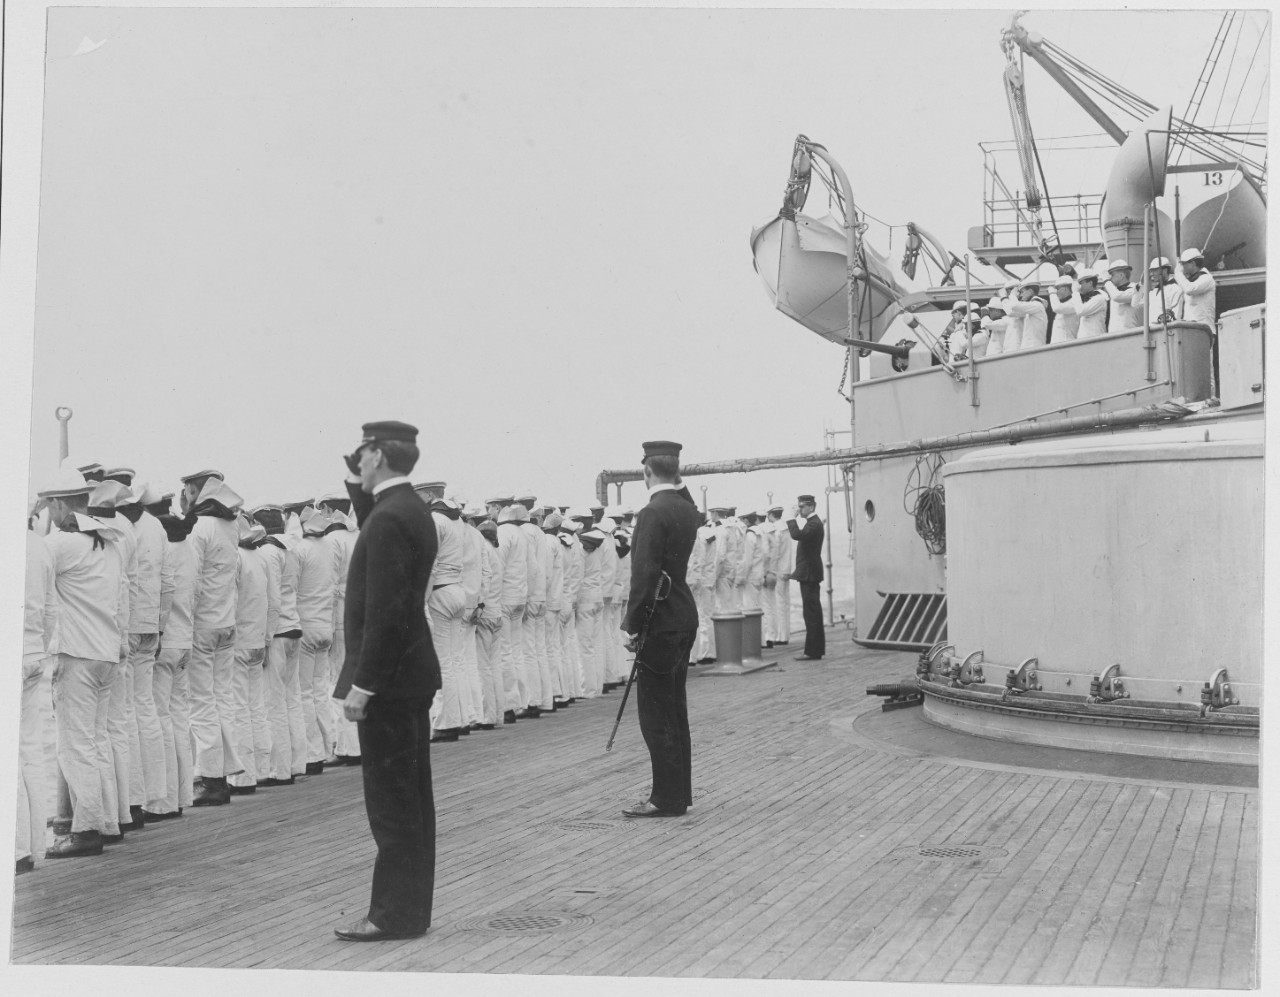 Manning rail for salute to passing vessel, class of 1905.